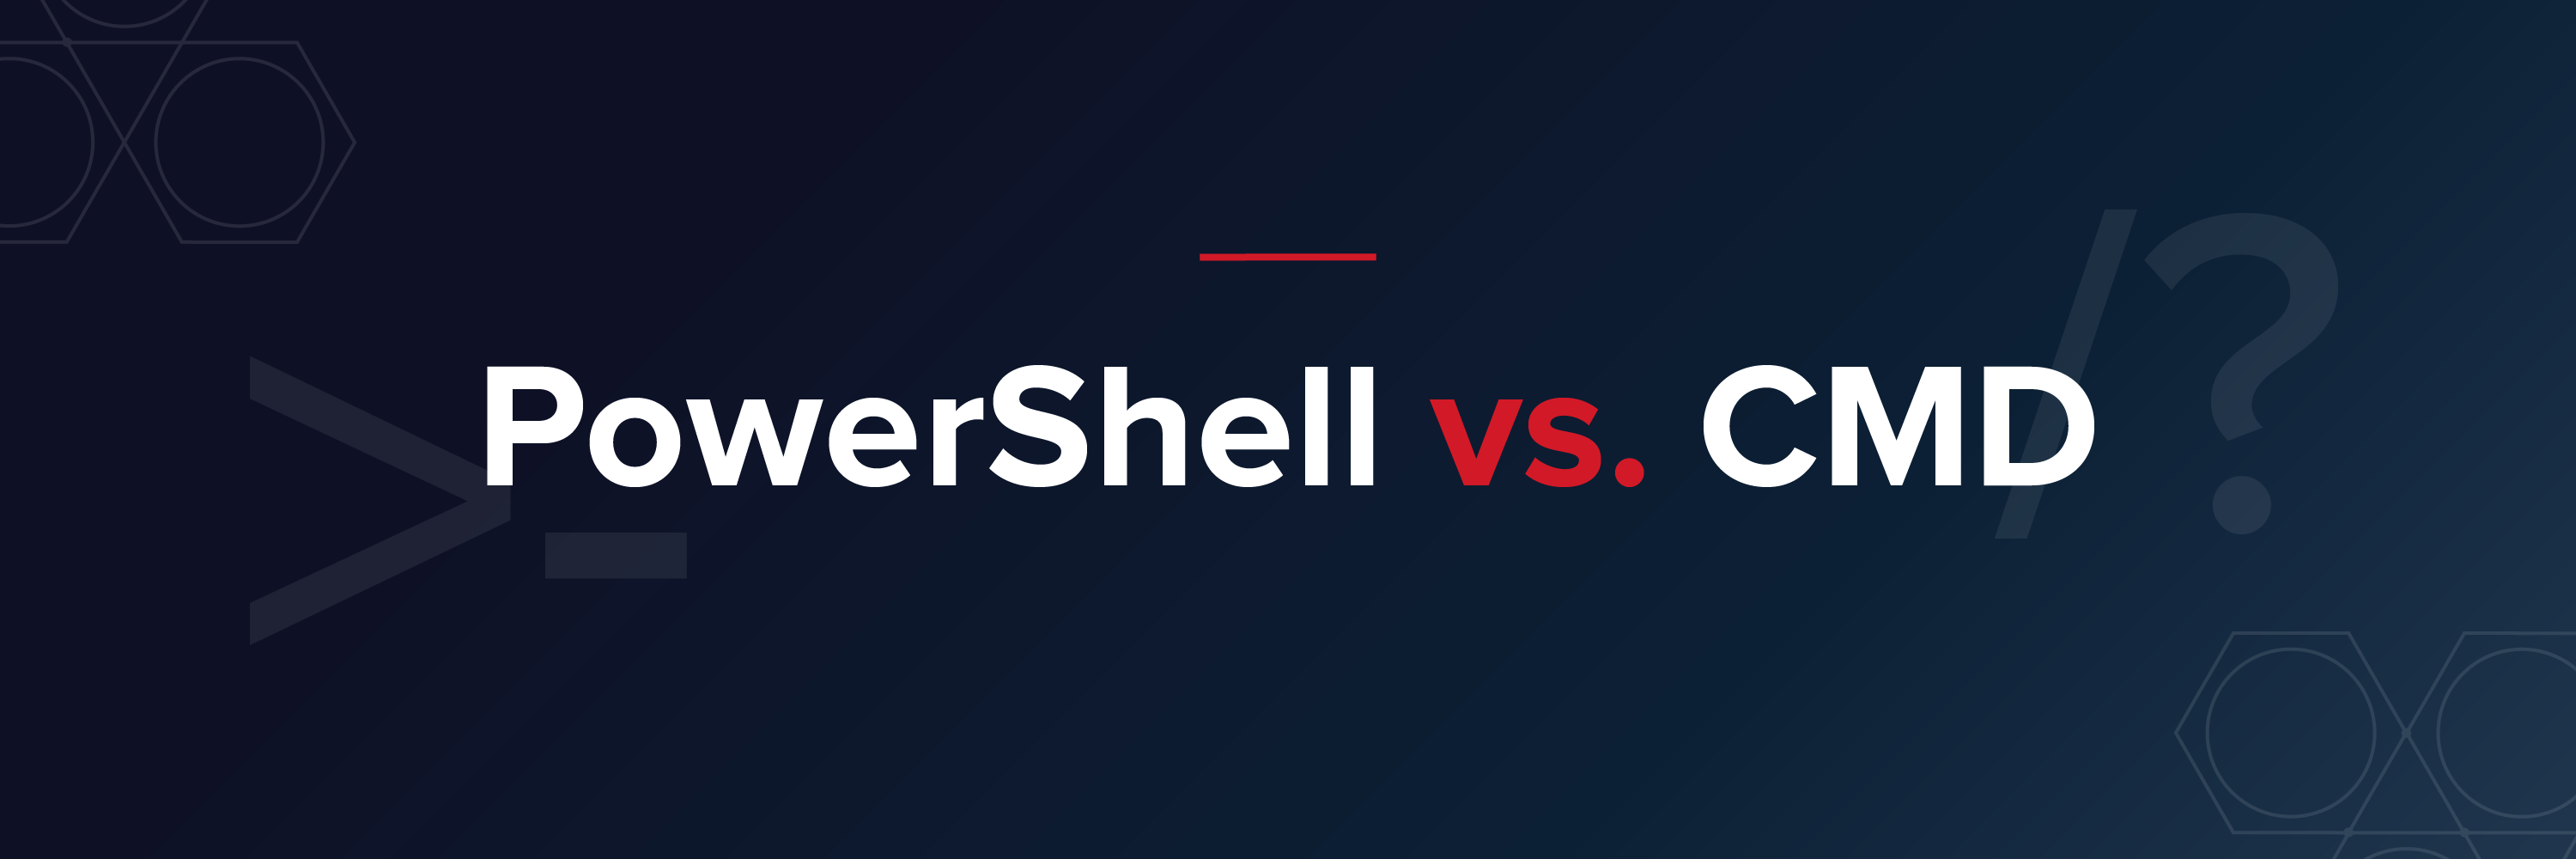 Windows PowerShell vs. CMD: What's The Difference?